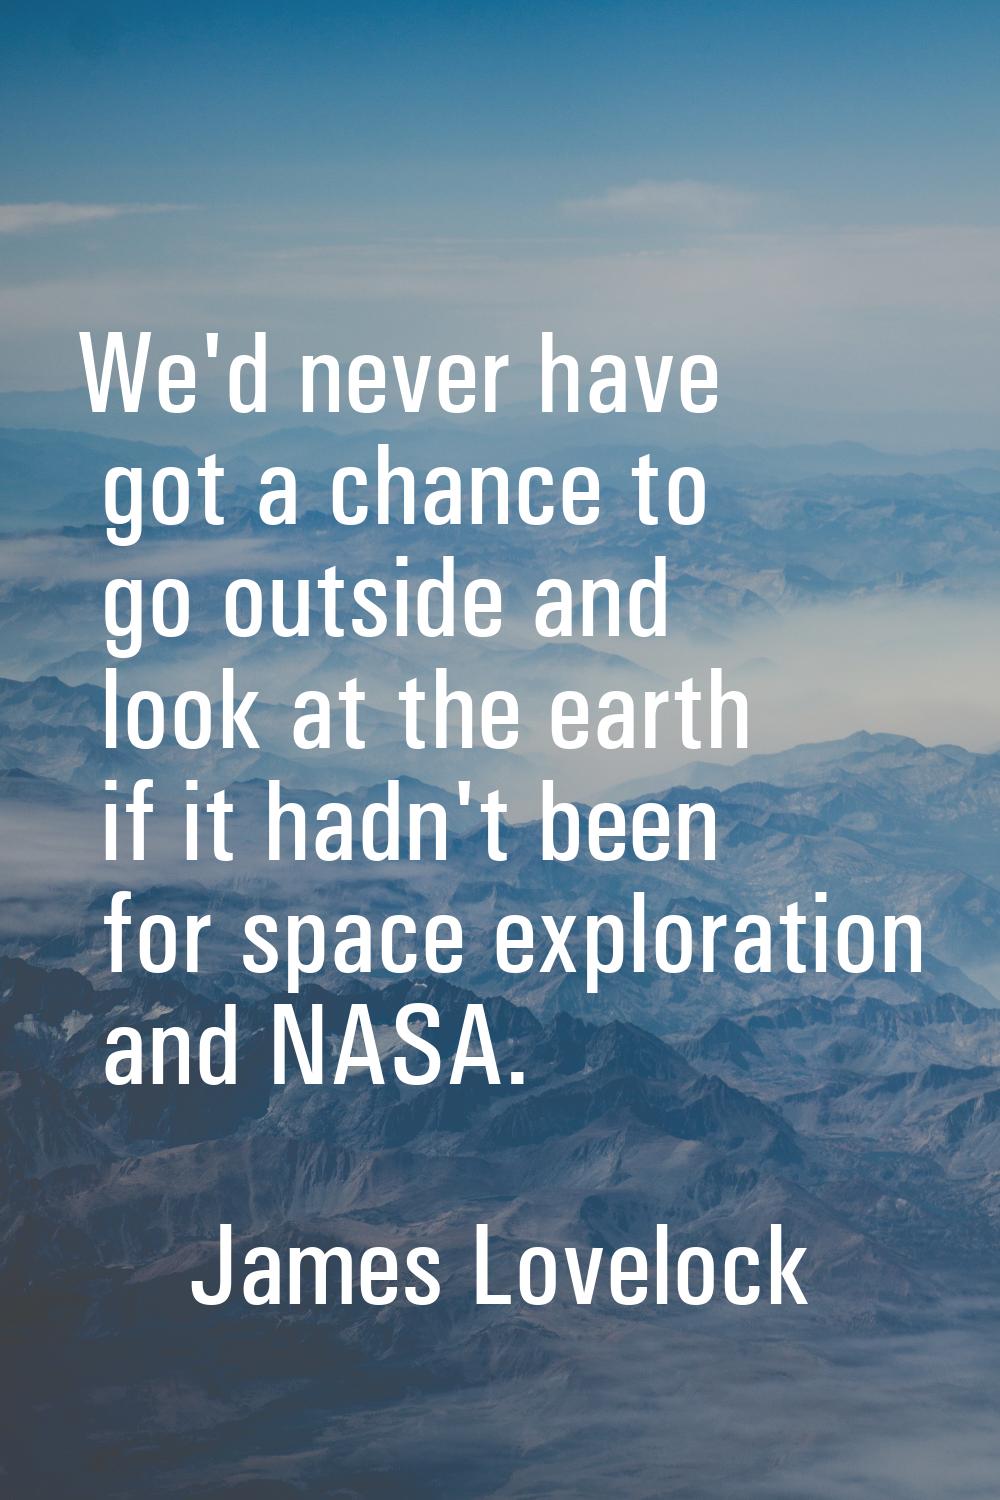 We'd never have got a chance to go outside and look at the earth if it hadn't been for space explor